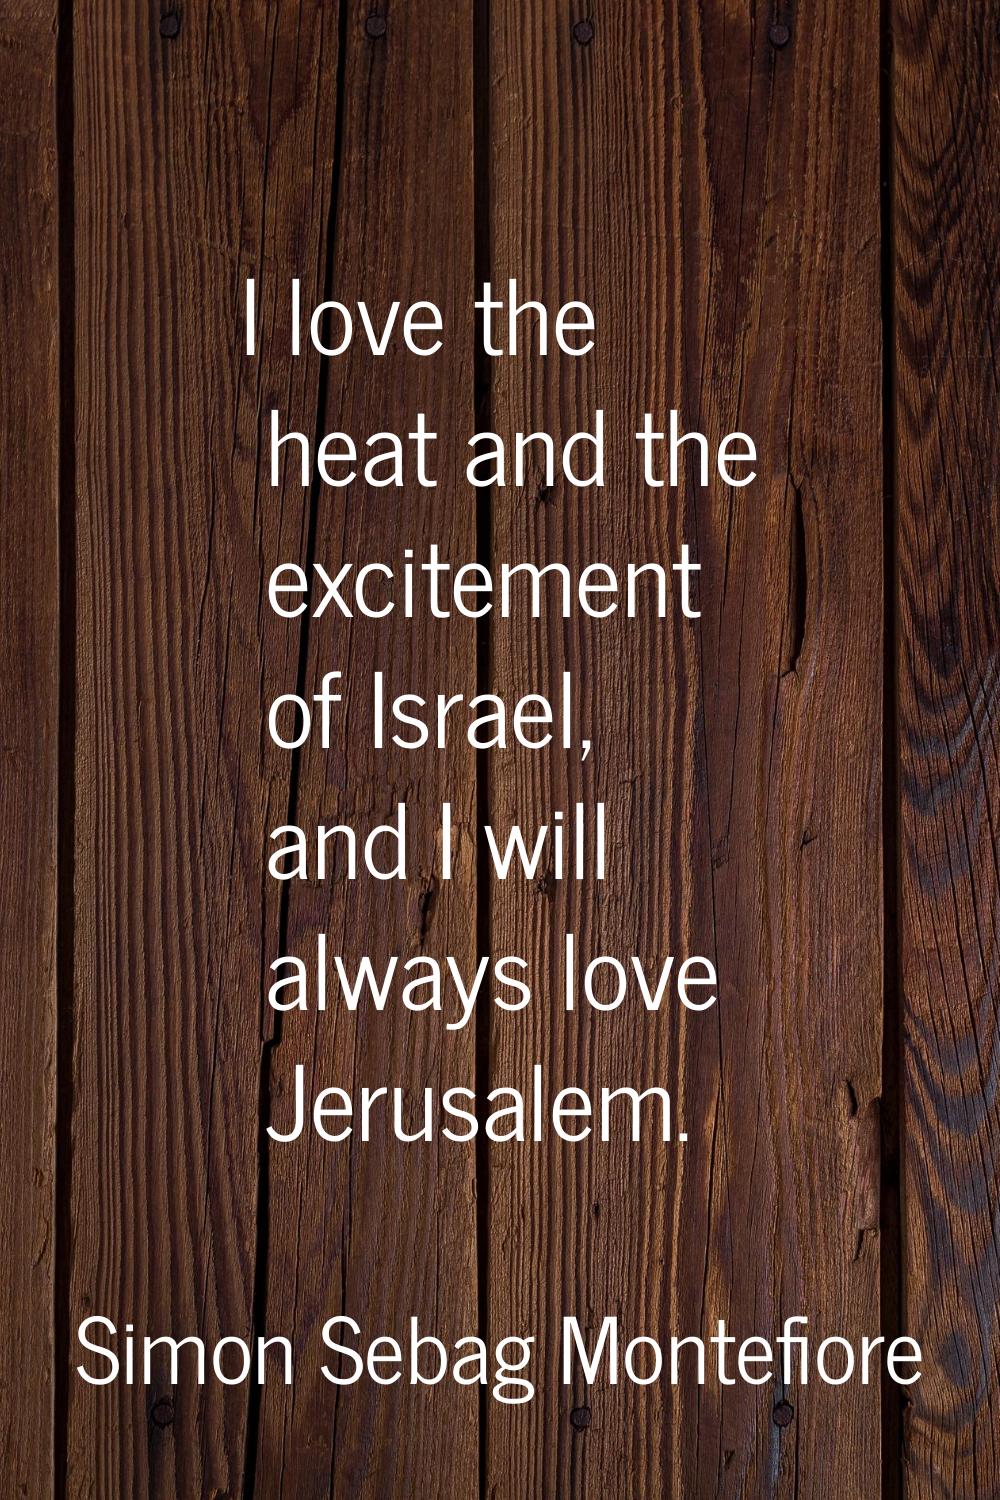 I love the heat and the excitement of Israel, and I will always love Jerusalem.